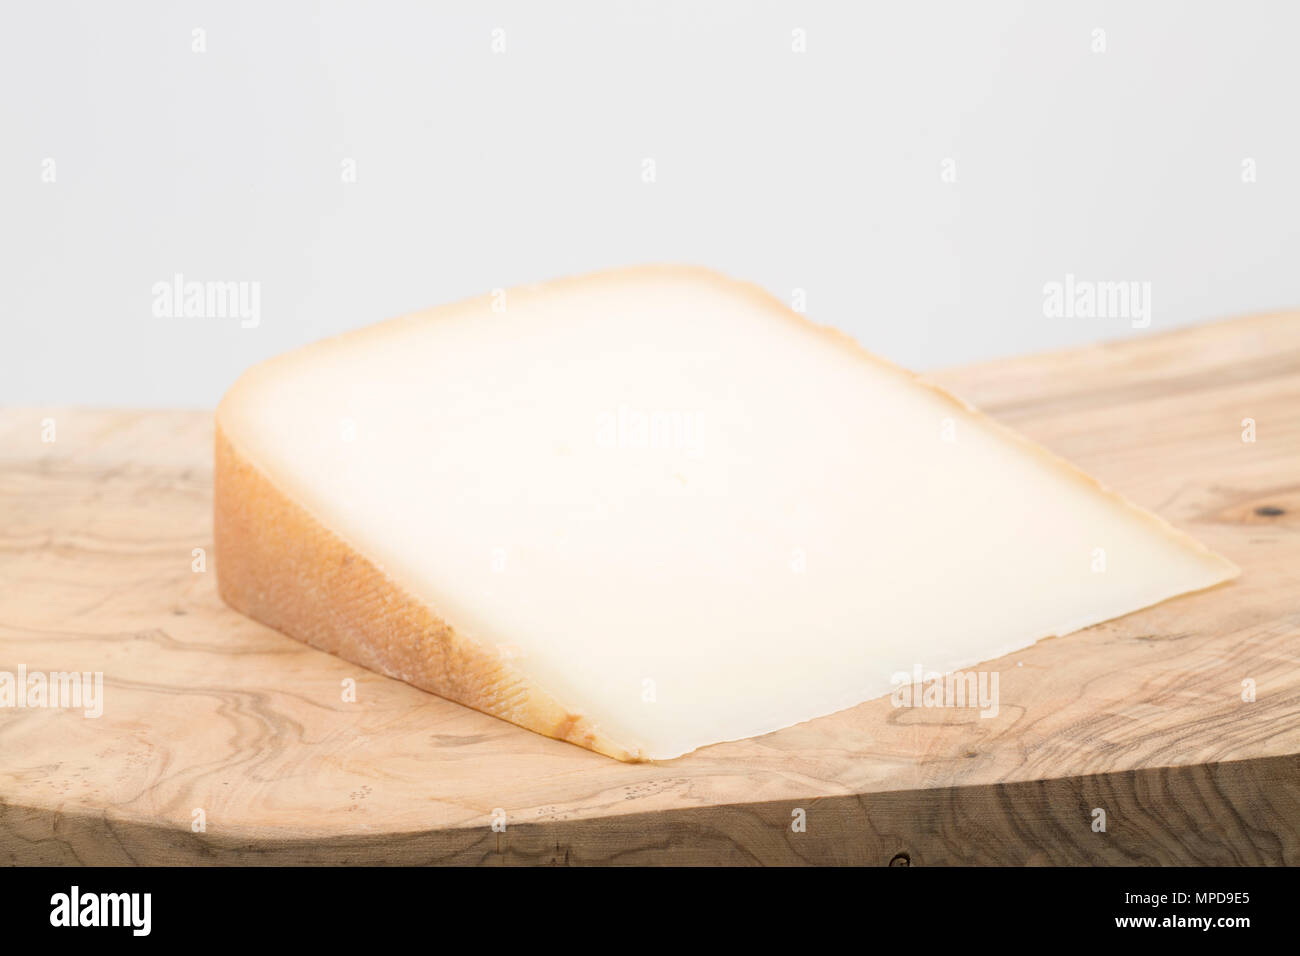 Ossau Iraty cheese from the Fench Pyrenees made from ewe’s milk bought from a supermarket in the UK. England UK GB Stock Photo